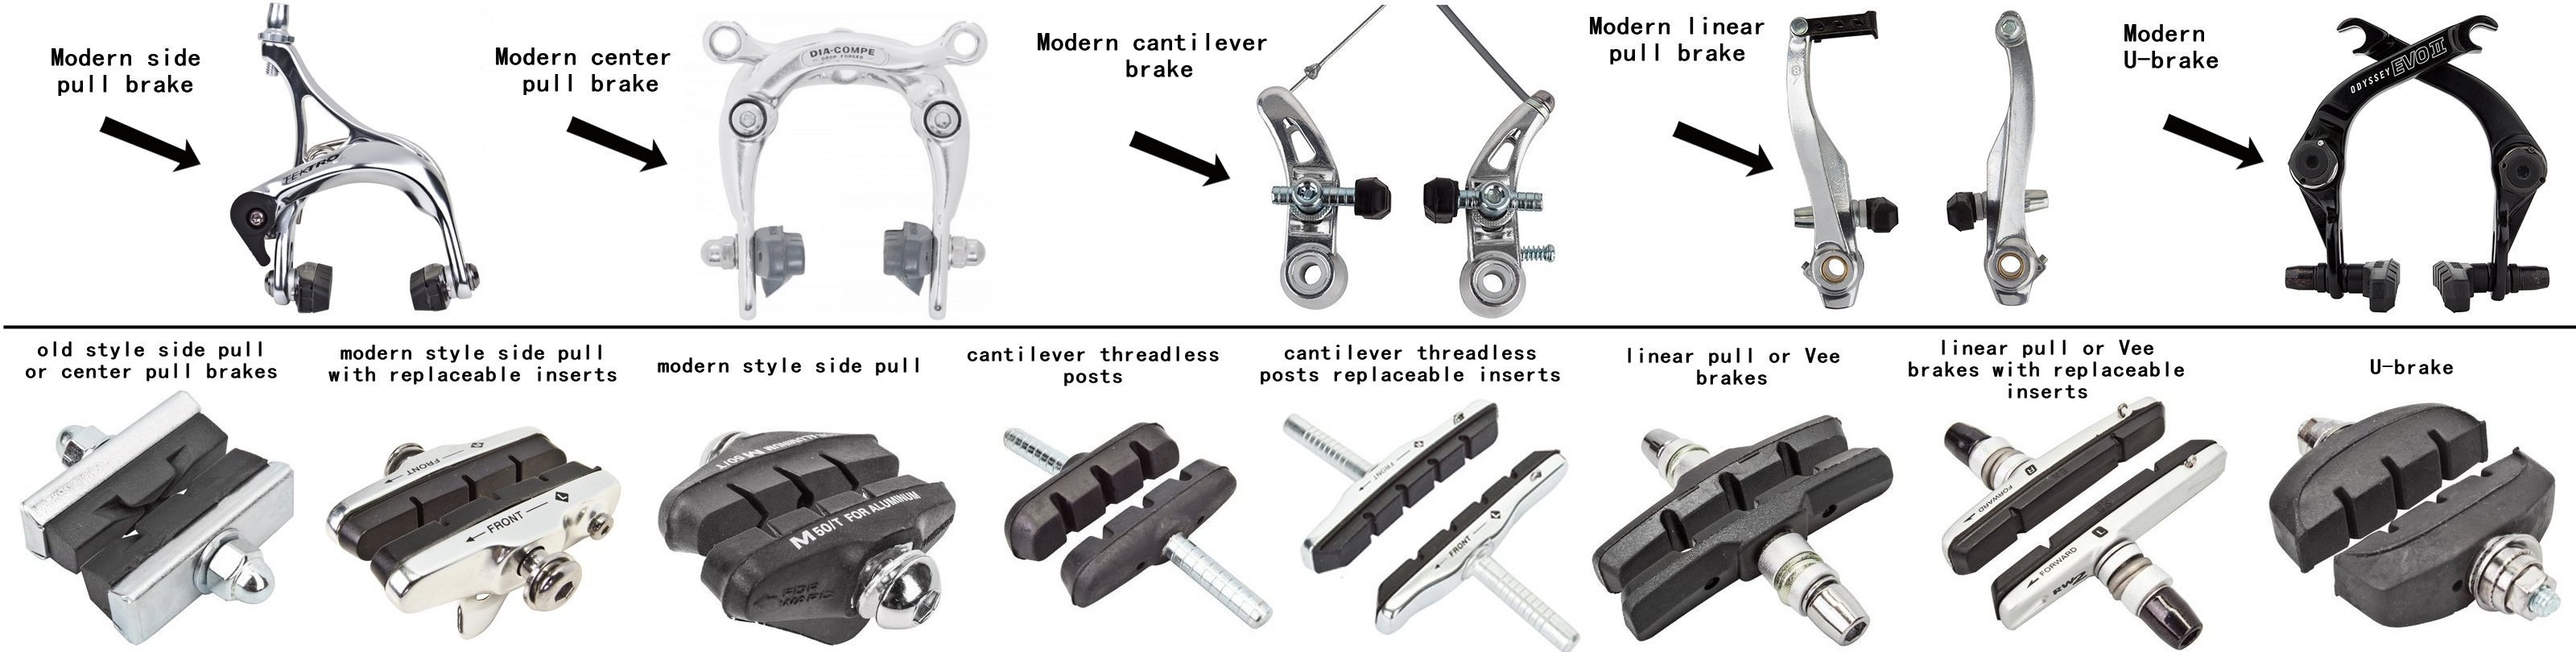 types of cantilever brakes